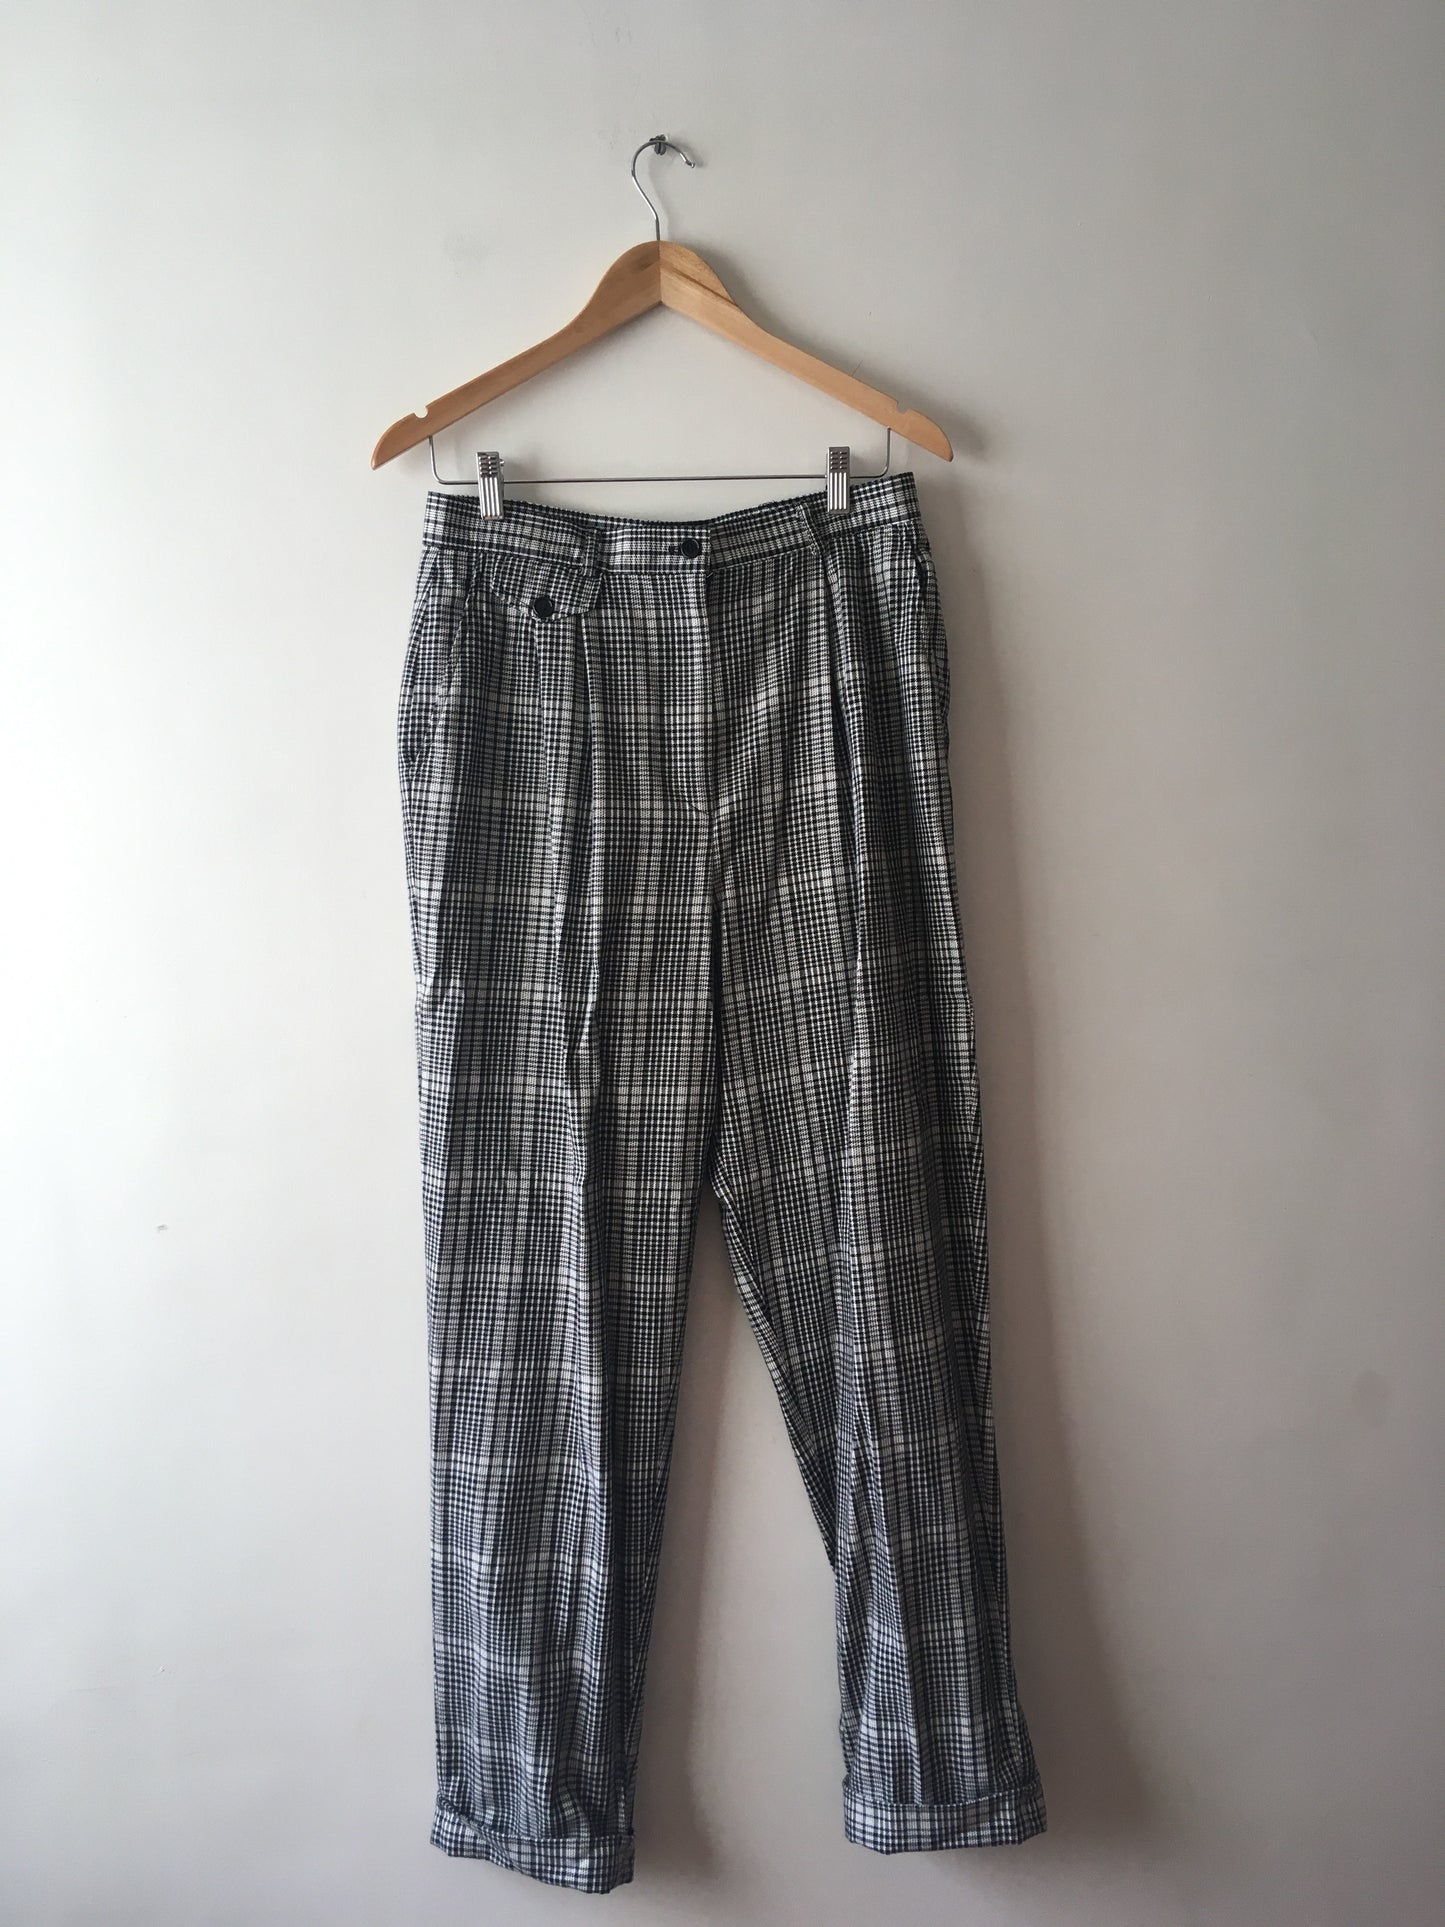 Black and white checked pants